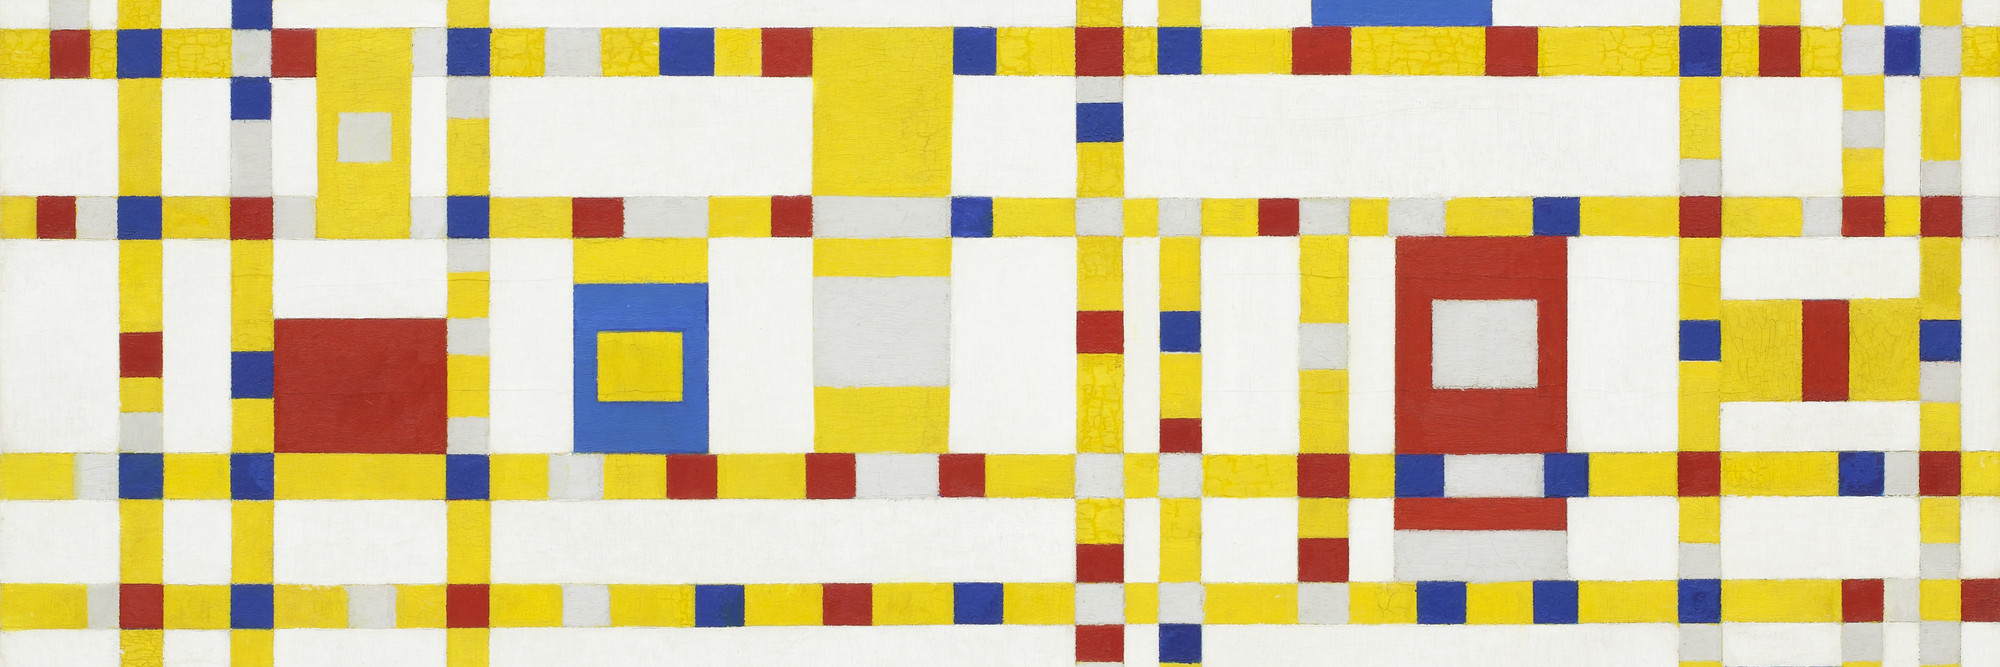 Piet Mondrian. Broadway Boogie Woogie. 1942–43. Oil on canvas, 50 × 50″ (127 × 127 cm). Given anonymously